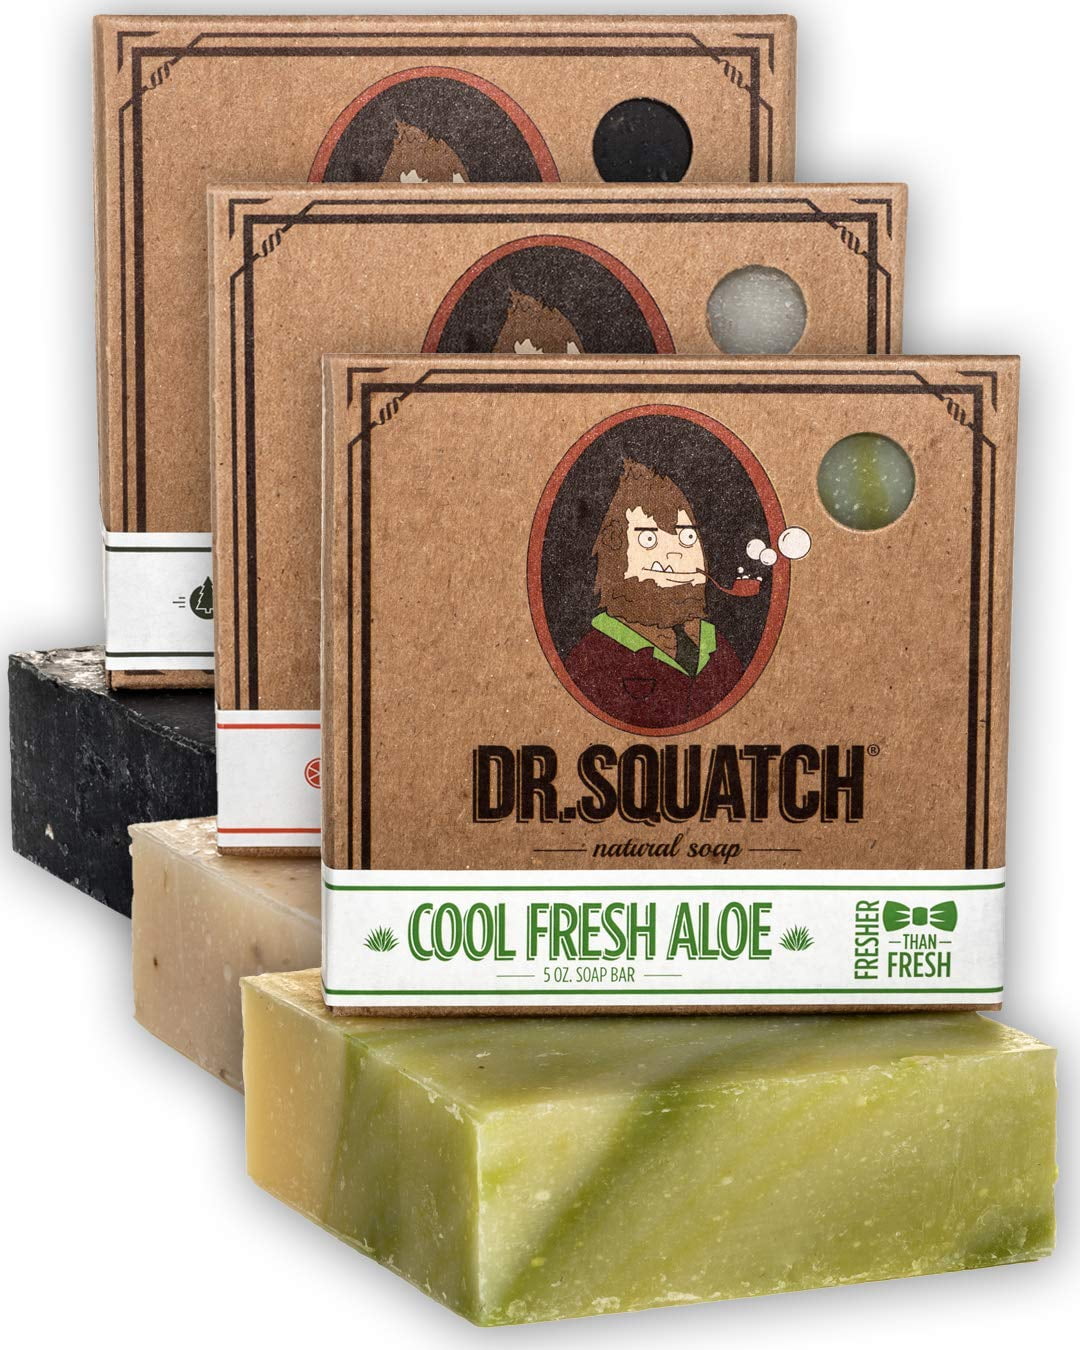 Pick 1 Dr. Squatch Men's Soap Bars 5oz - Free Shipping - New look, same  Squatch!